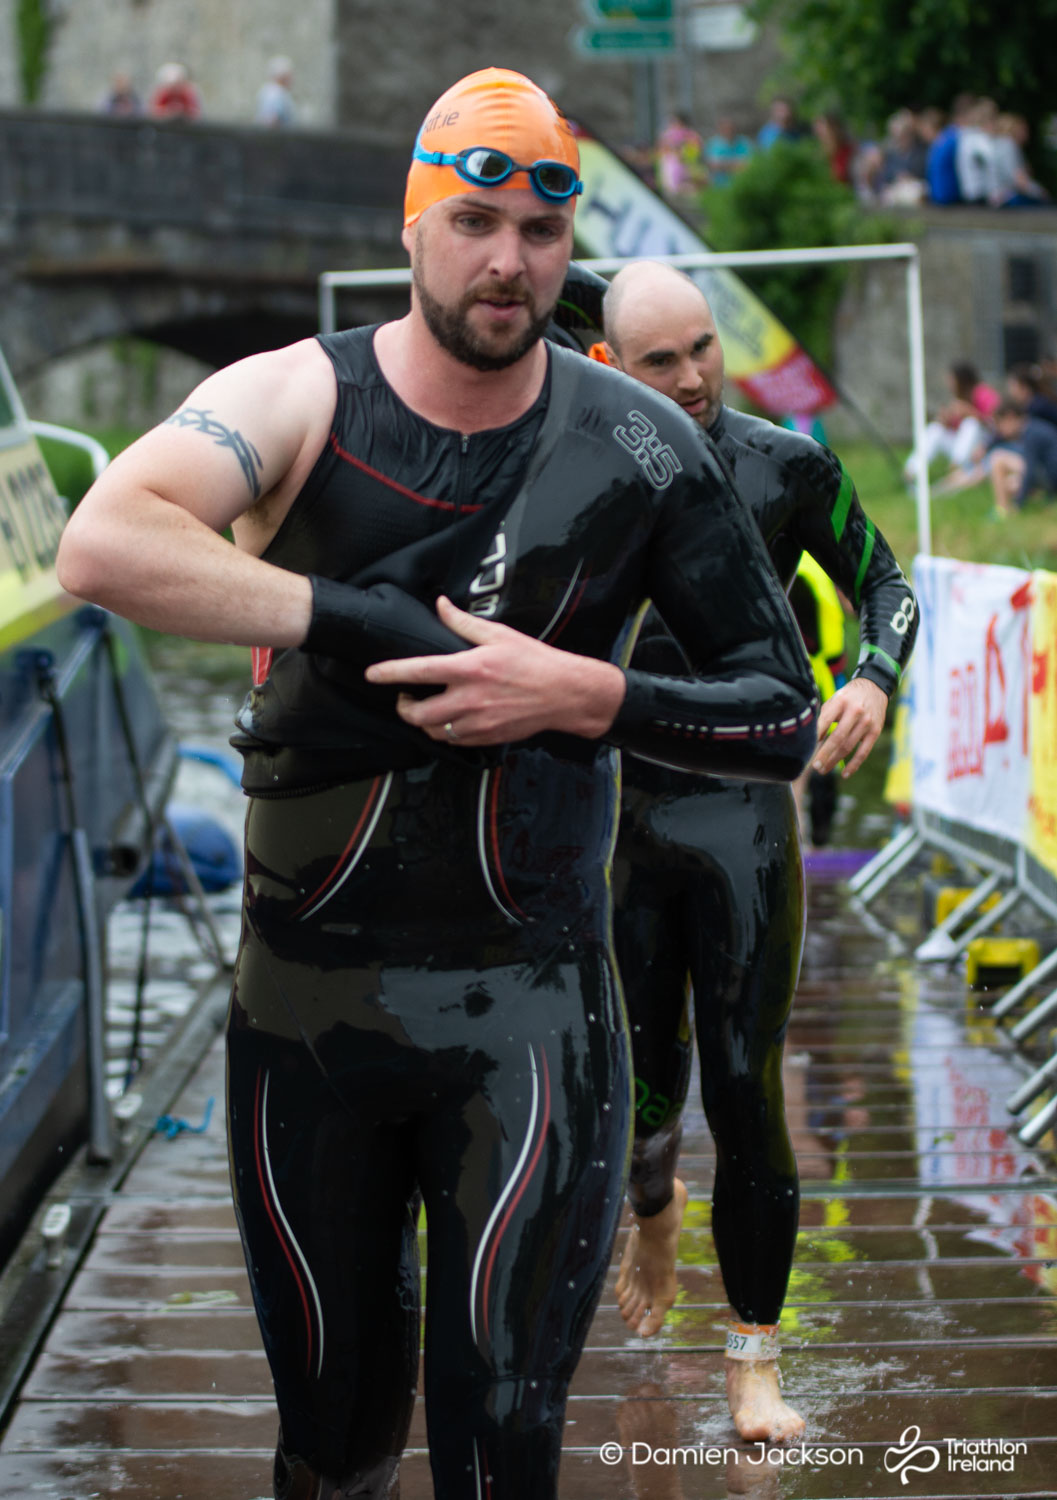 Athy_2018 (273 of 526) - TriAthy - XII Edition - 2nd June 2018